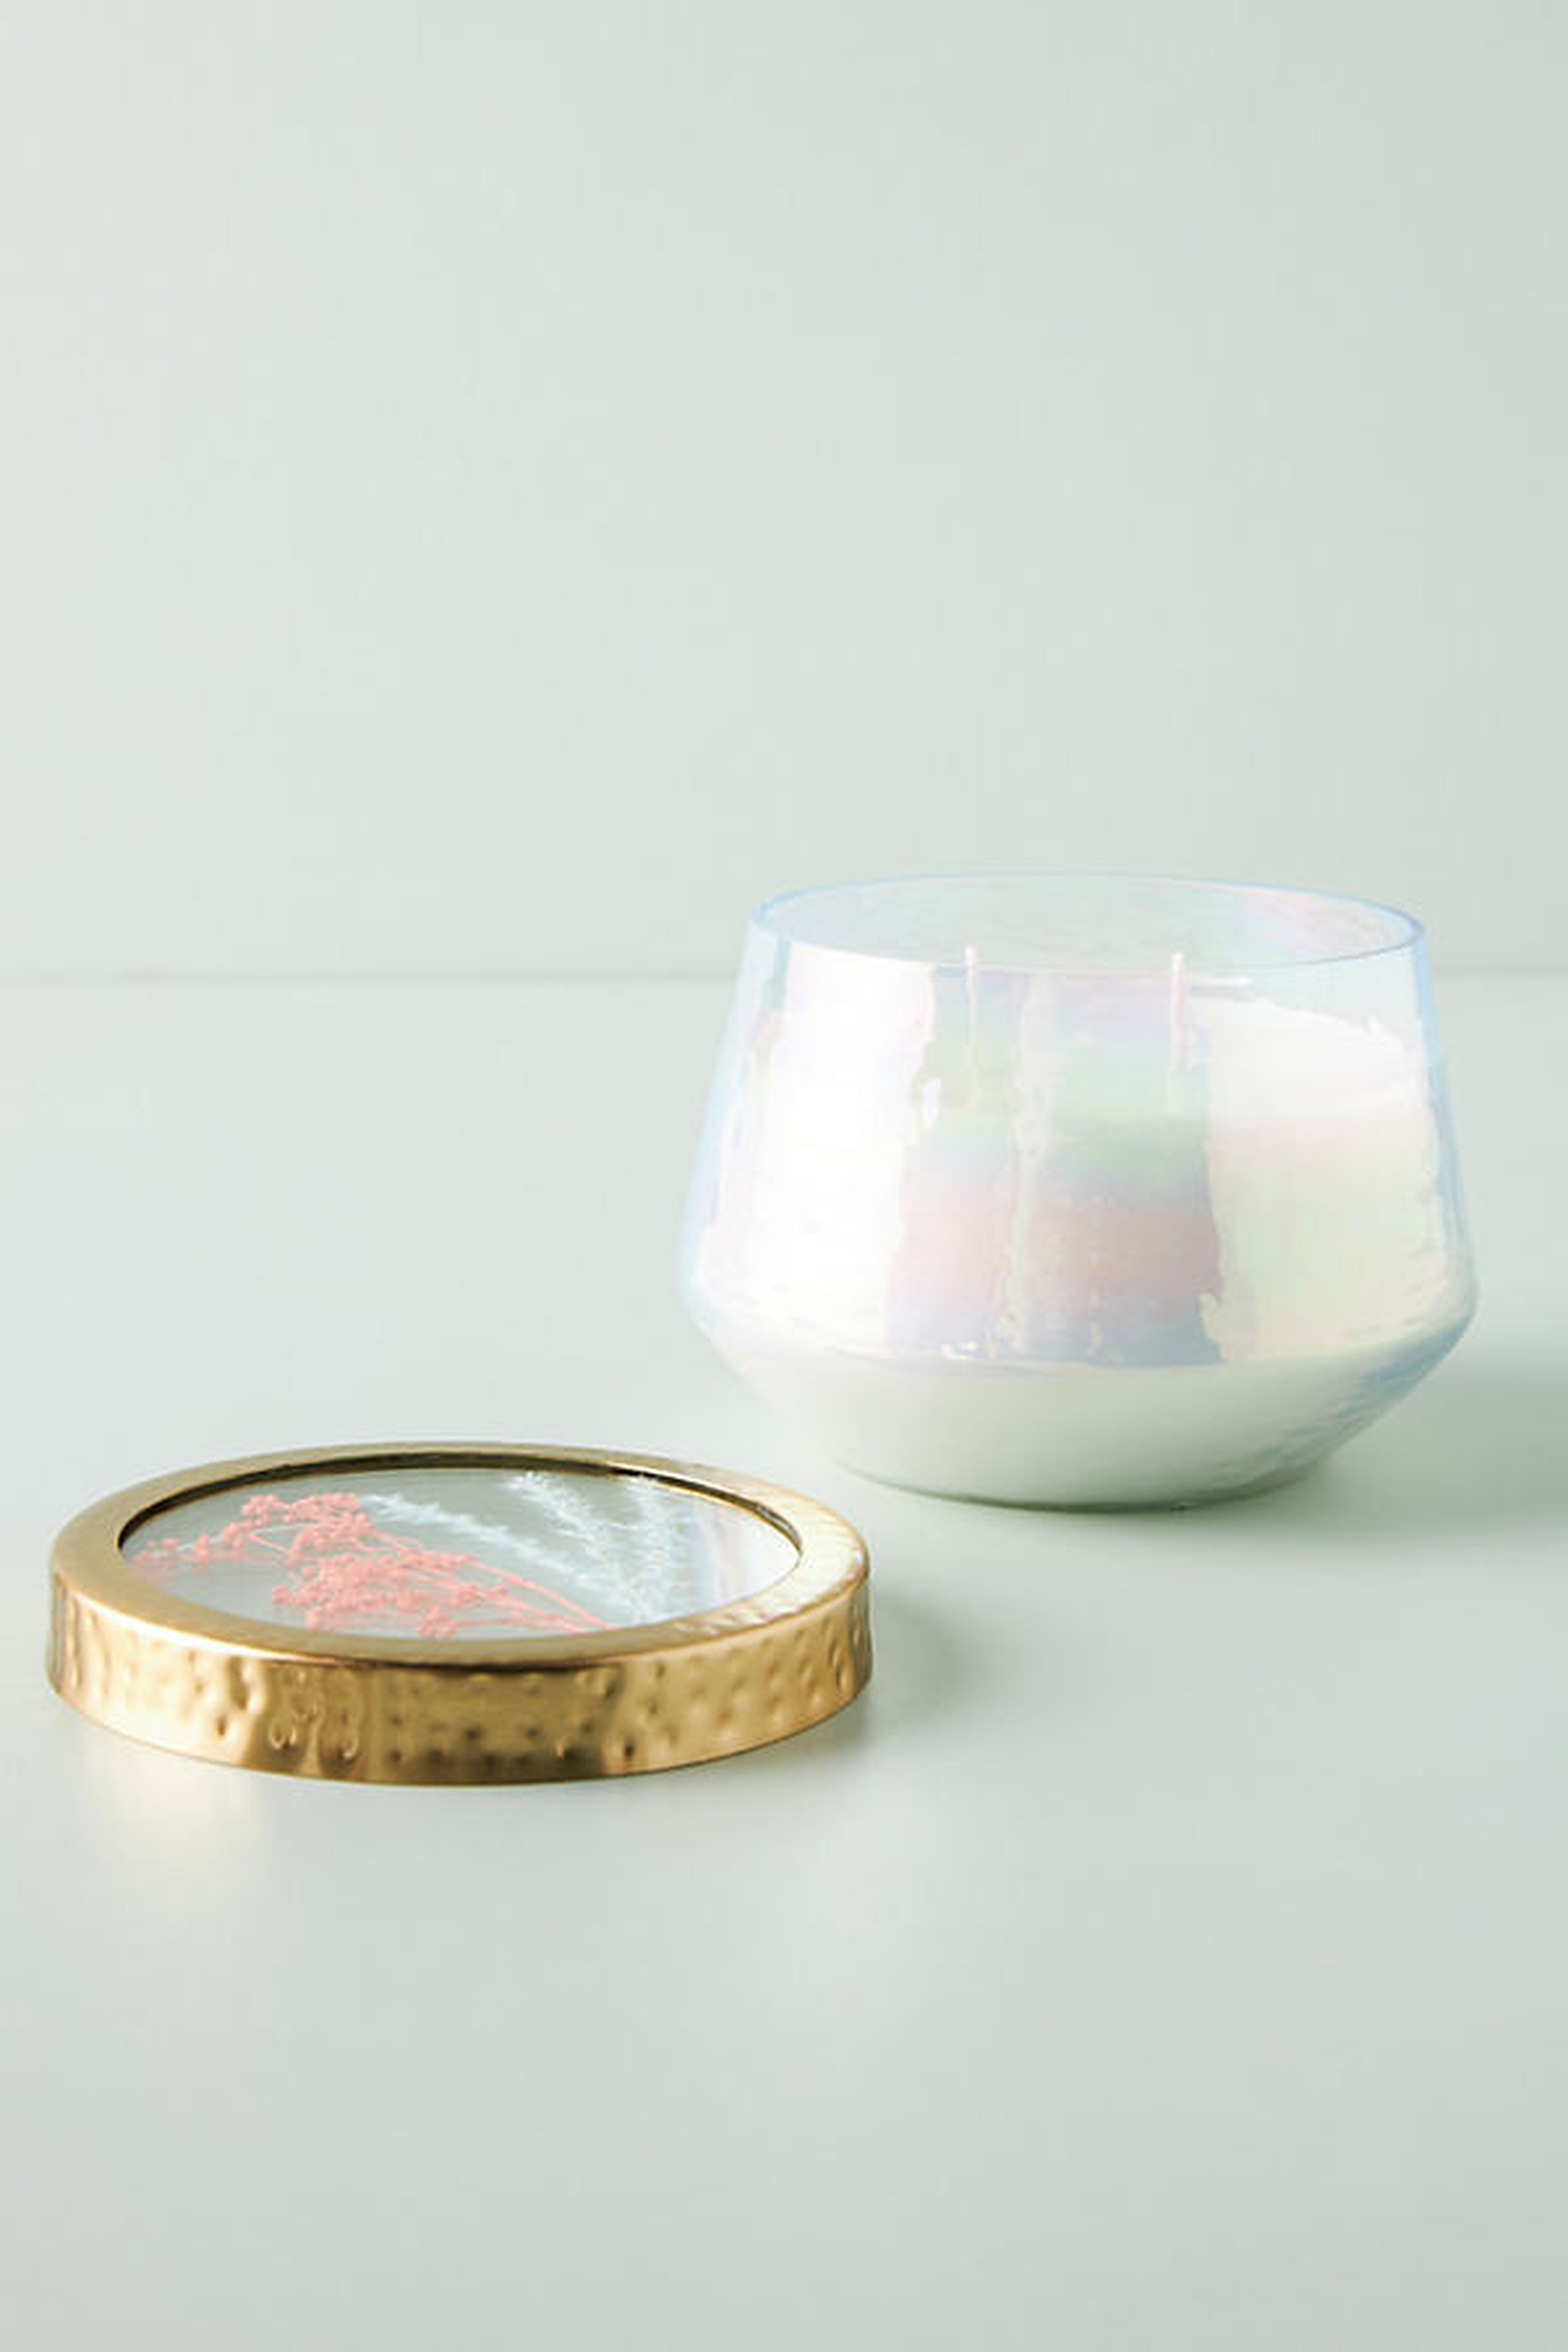 Floral Press Candle By Rosy Rings in White Size S - Anthropologie